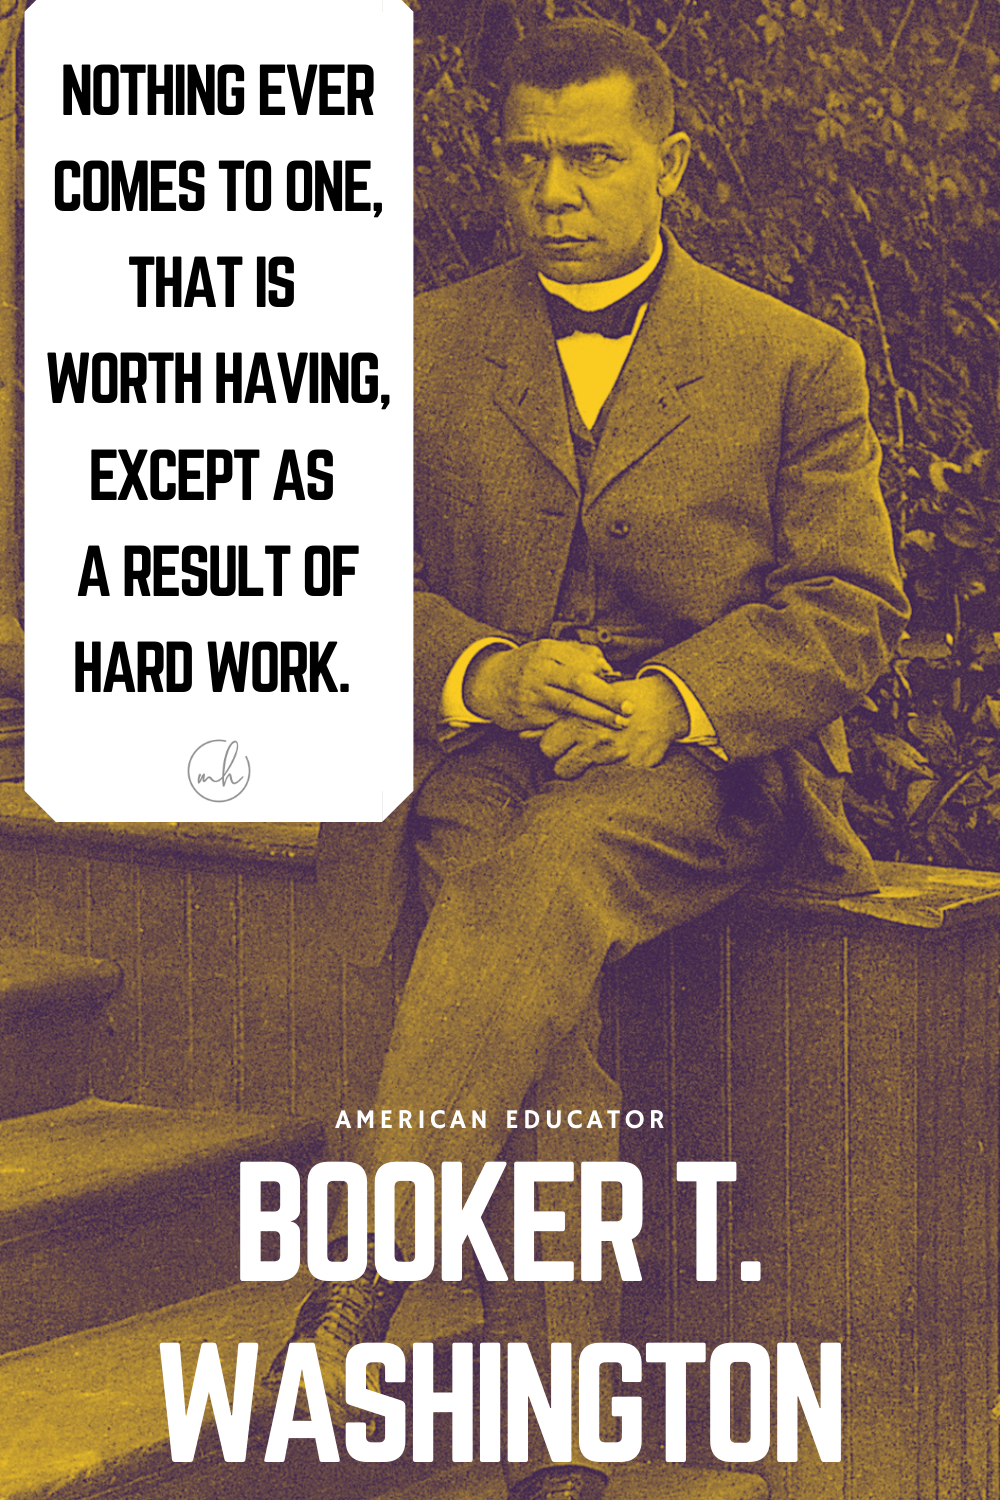 "Nothing ever comes to one, that is worth having, except as a result of hard work." - Booker T. Washington